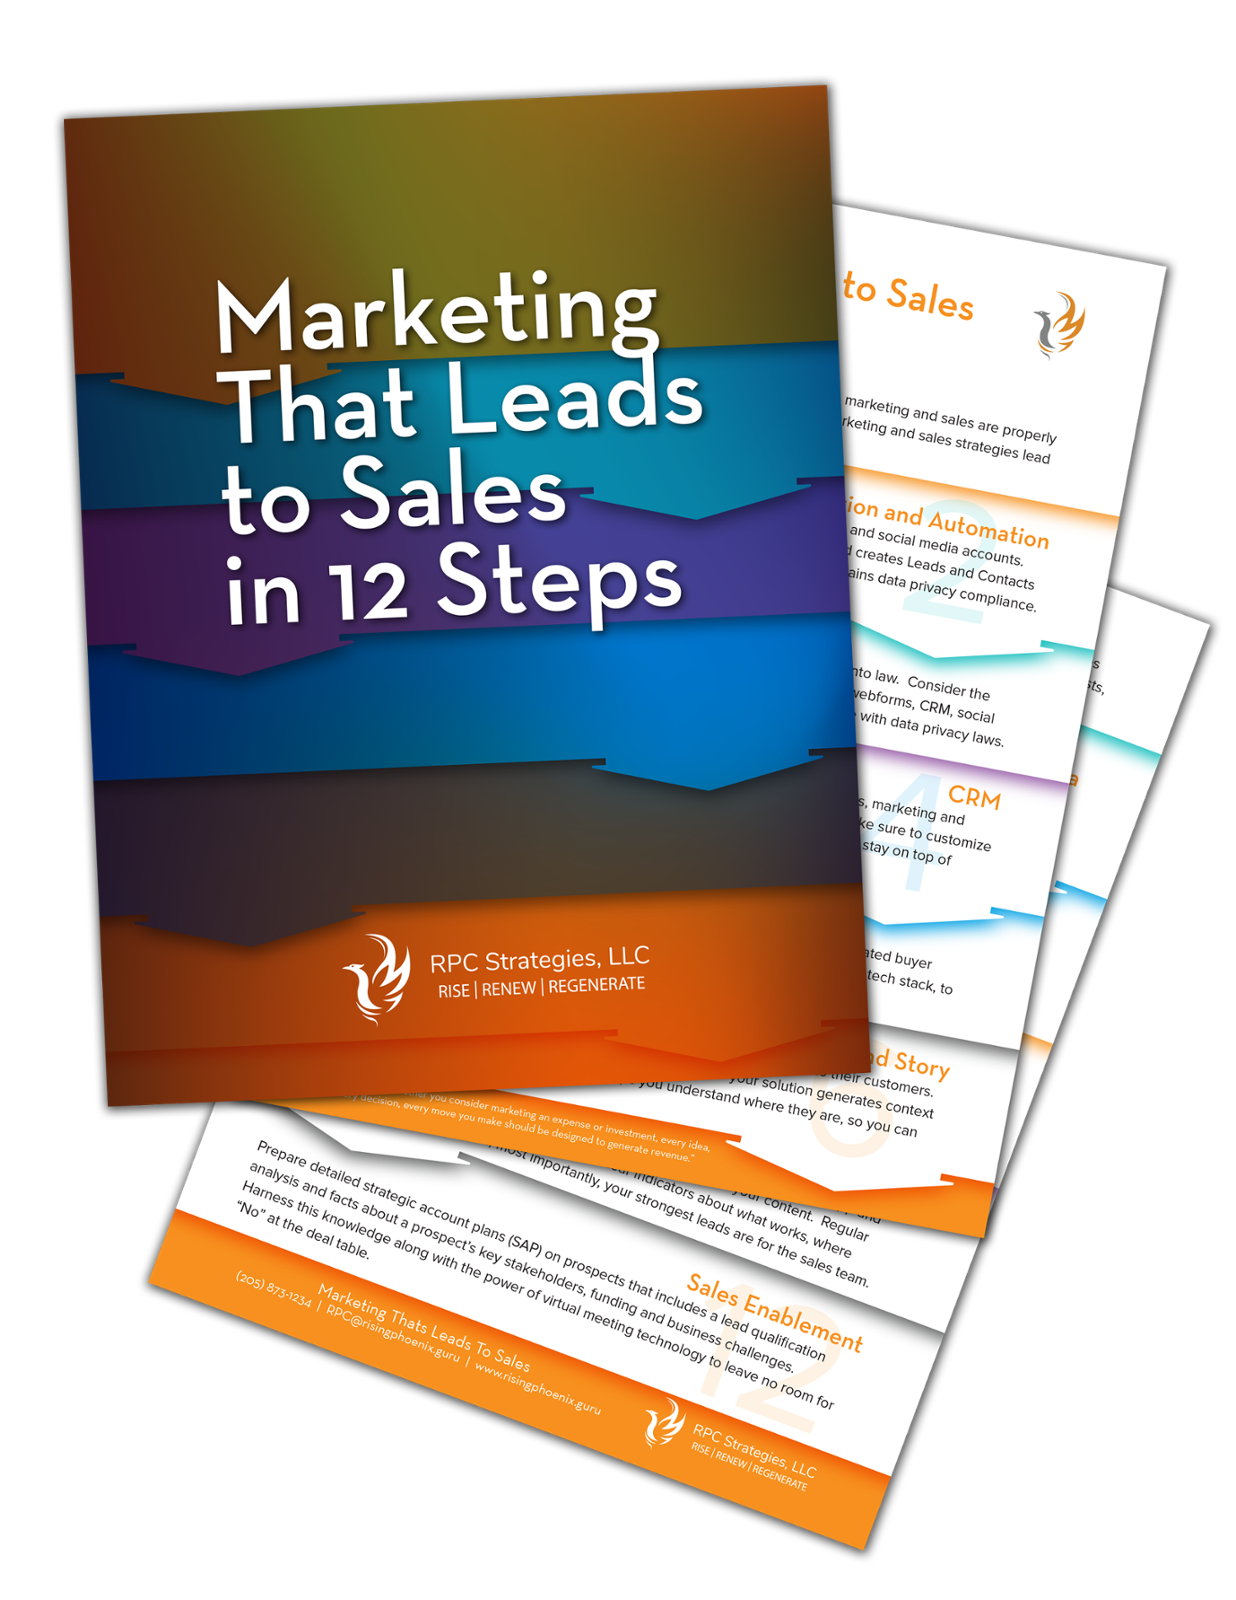 Brochure describing marketing and sales strategy in 12 steps